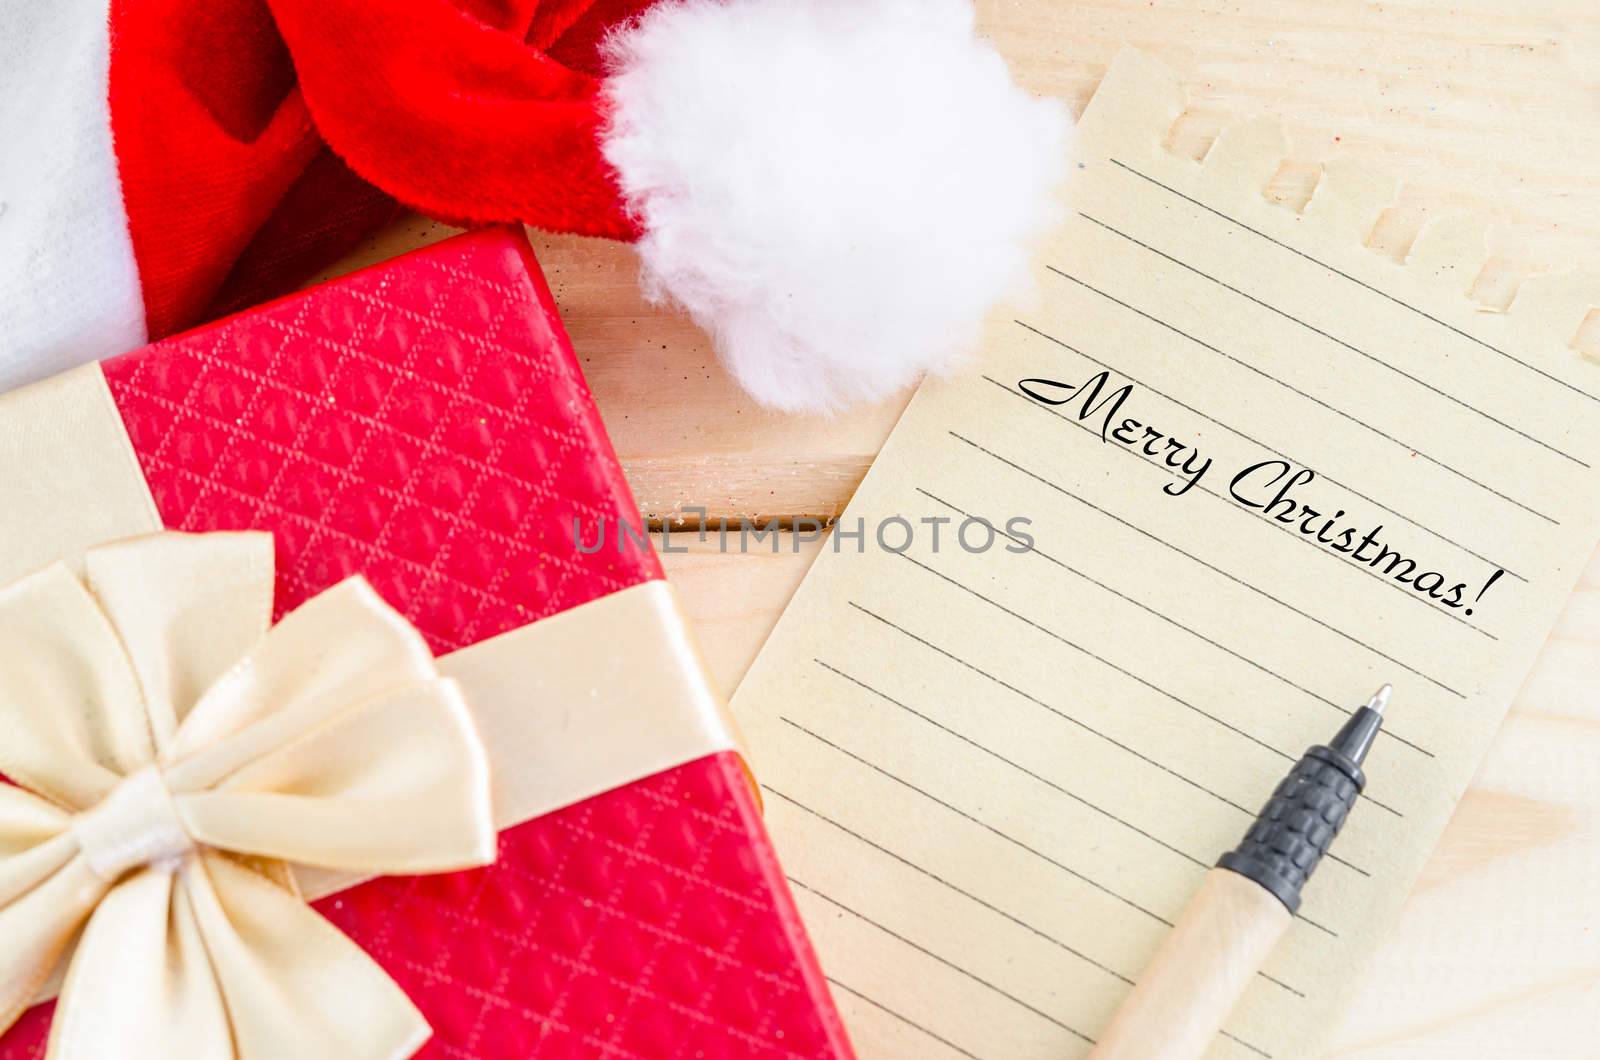 Merry Christmas word writing with pen on brown paper with red gift box on wooden background.